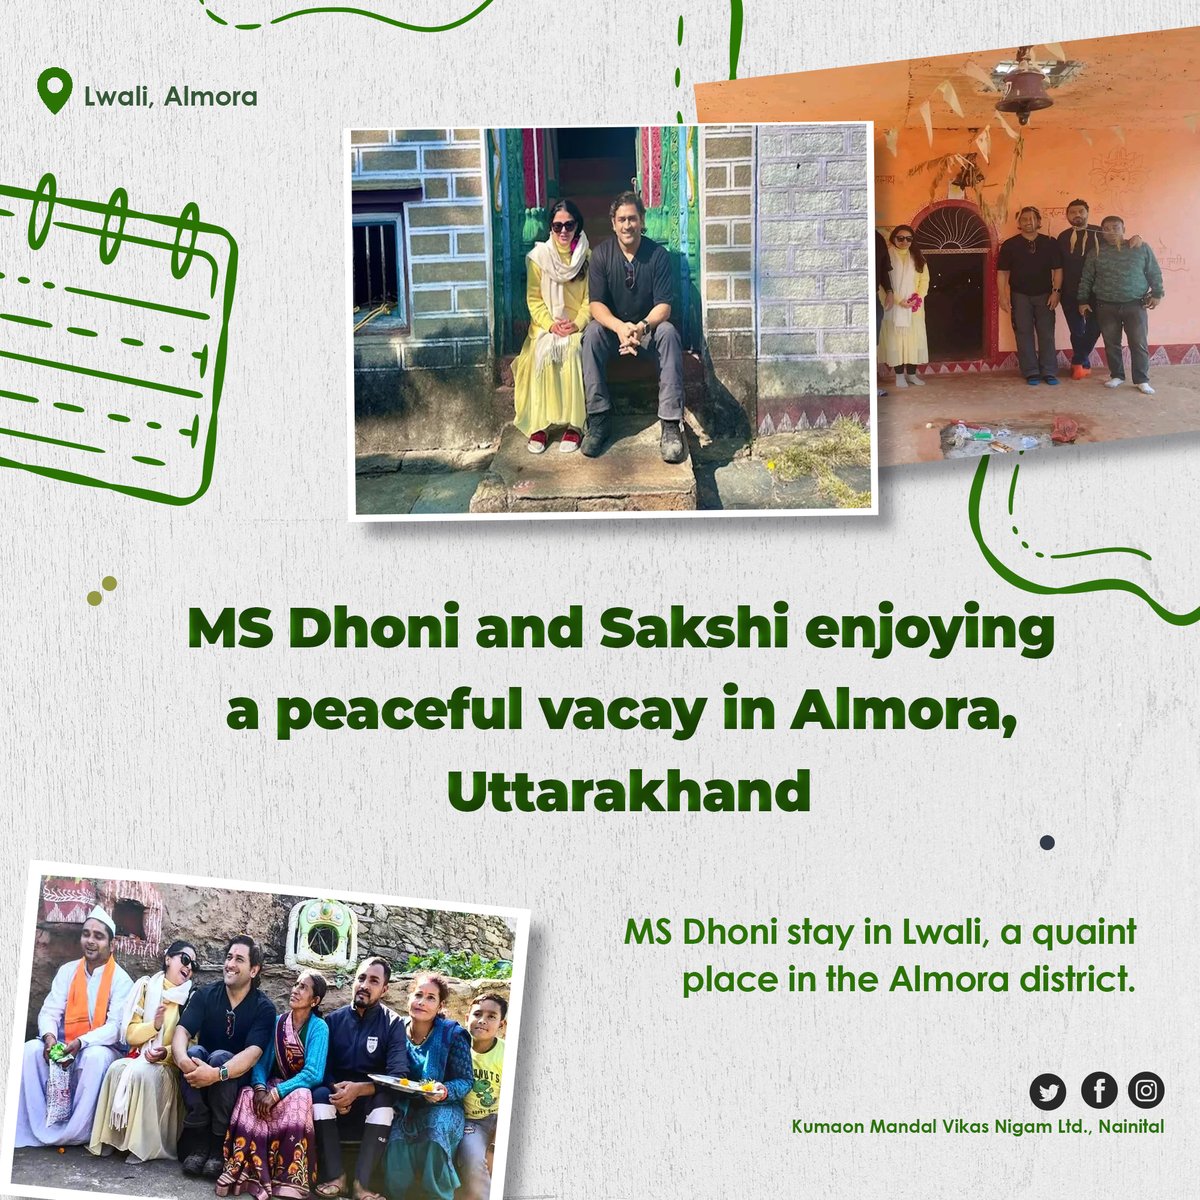 MS Dhoni and Sakshi enjoying a peaceful vacation in Almora, Uttarakhand and they are staying in Lwali, a quaint place in the Almora district. #msdhoni #mahendrasinghdhoni #almora #uttarakhand #kmvn #uttarakhandheaven #almorahills